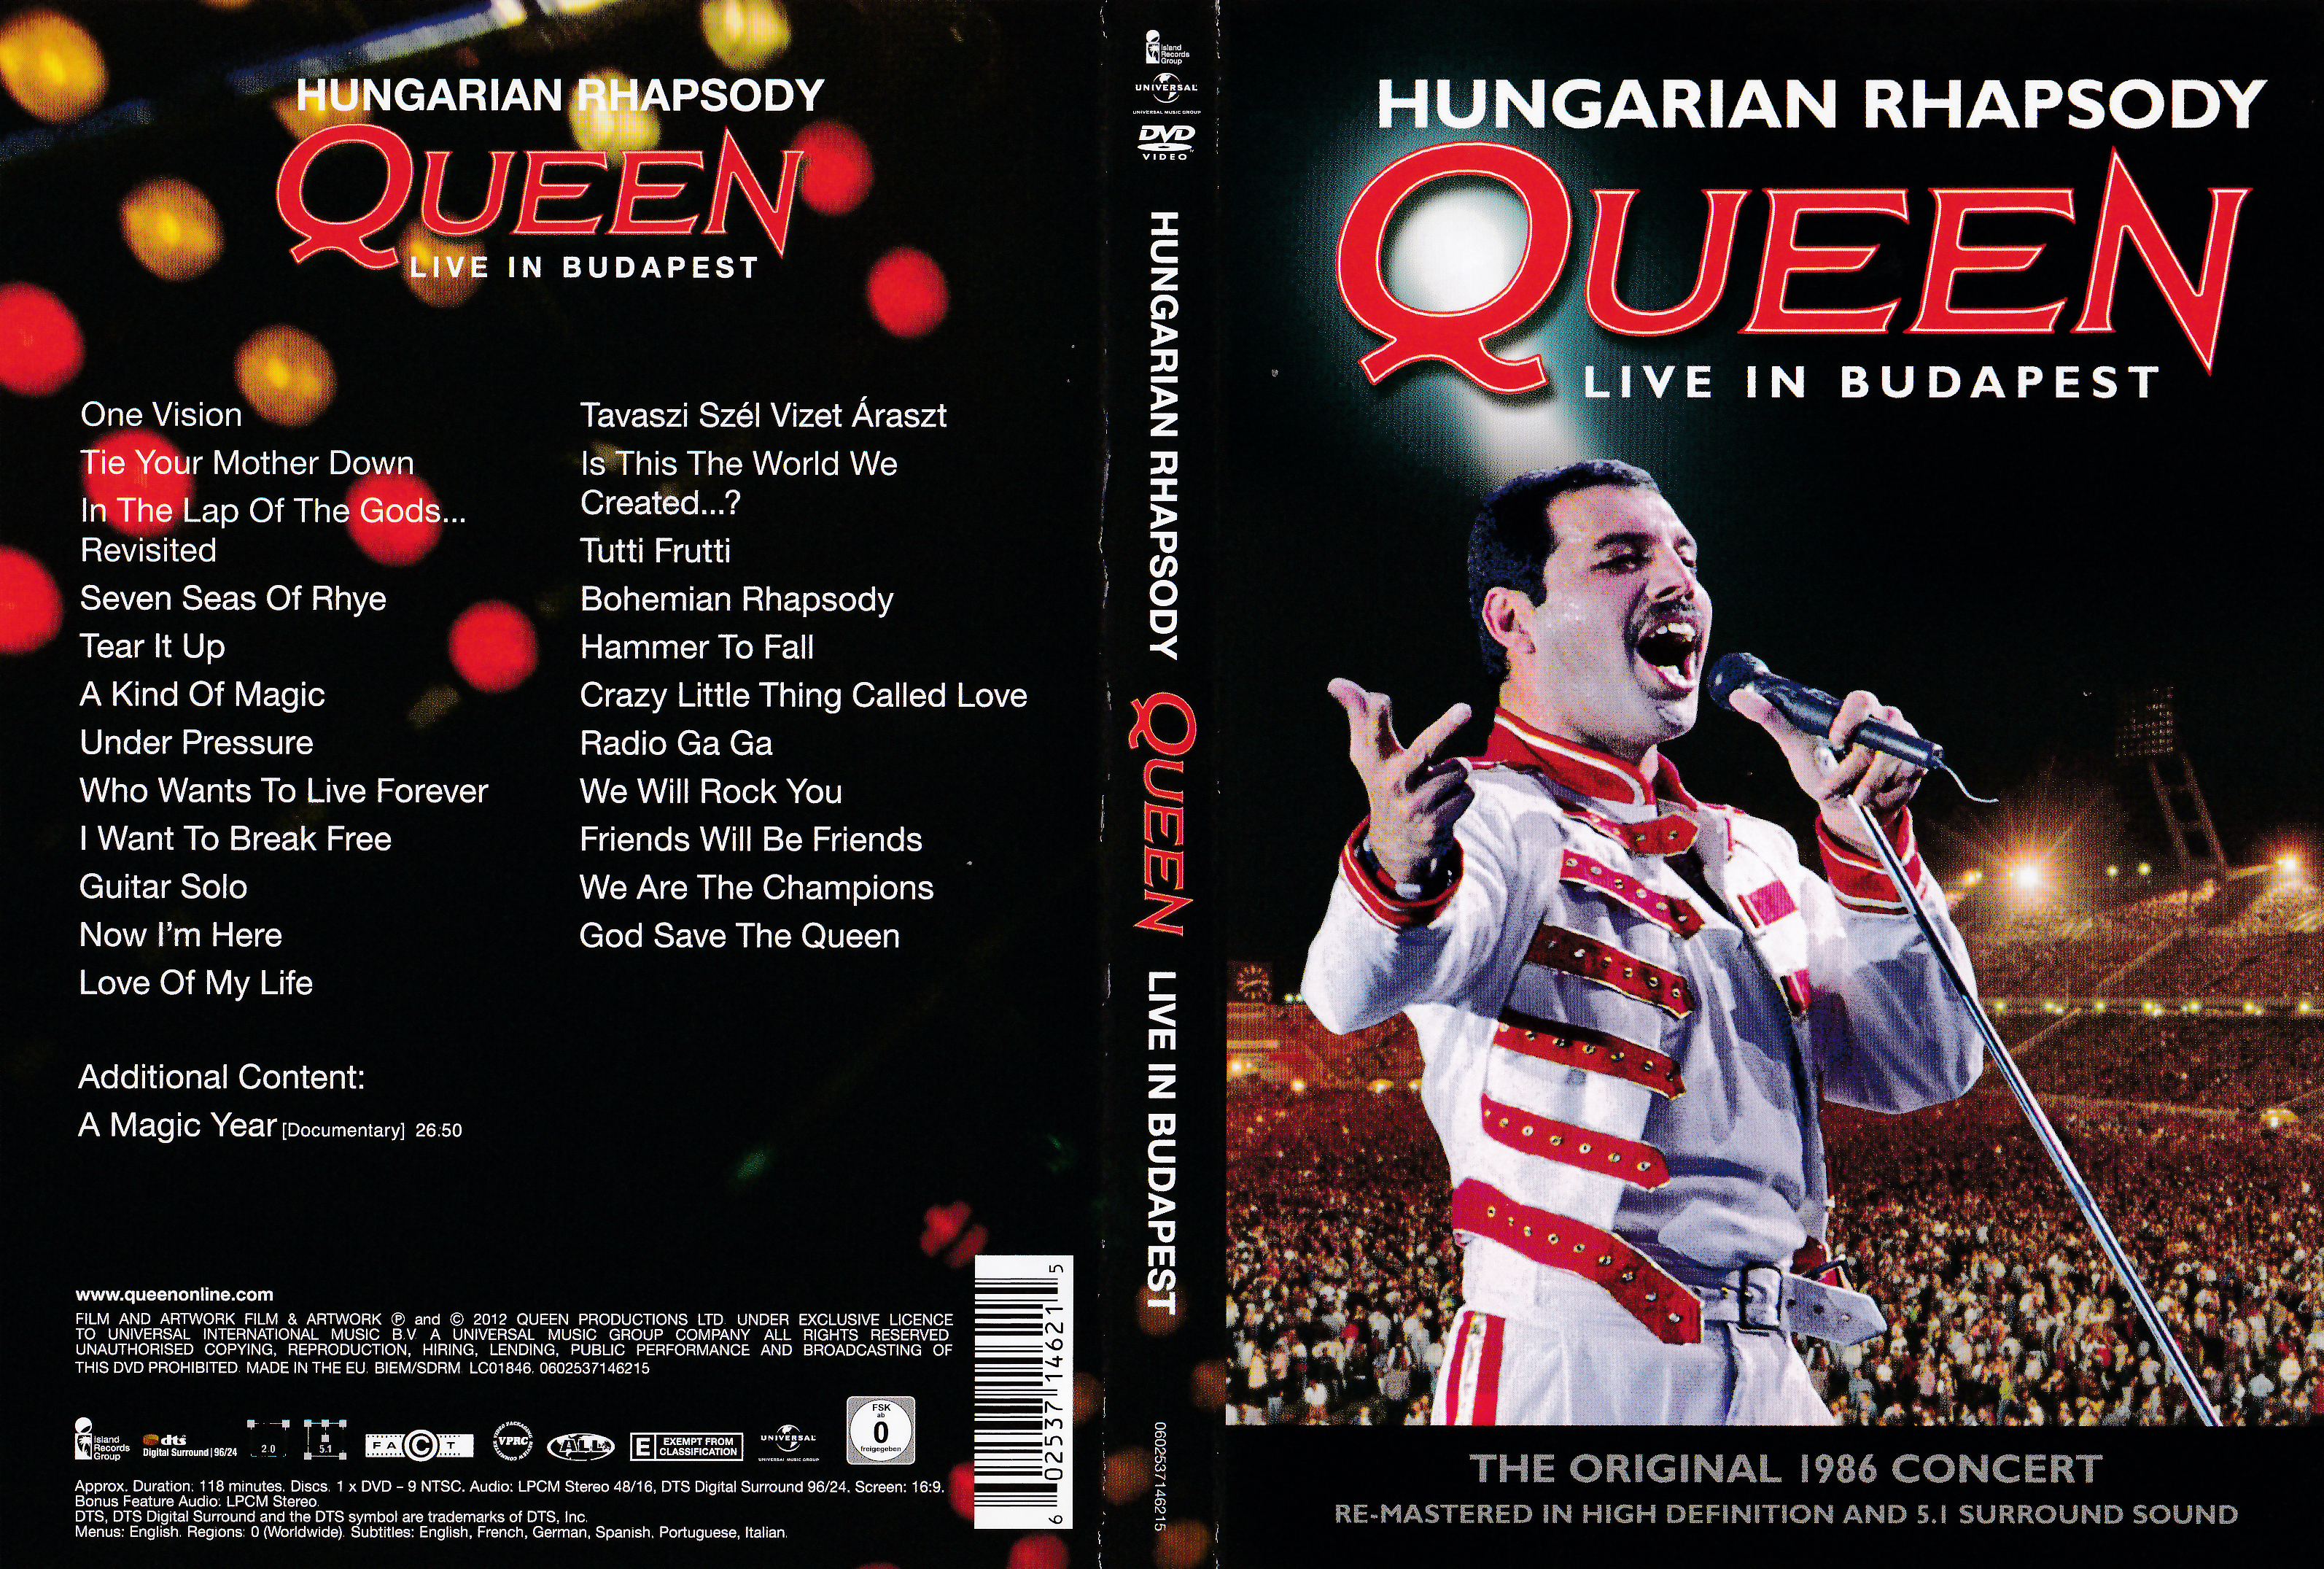 Jaquette DVD Queen live in Budapest 1986 